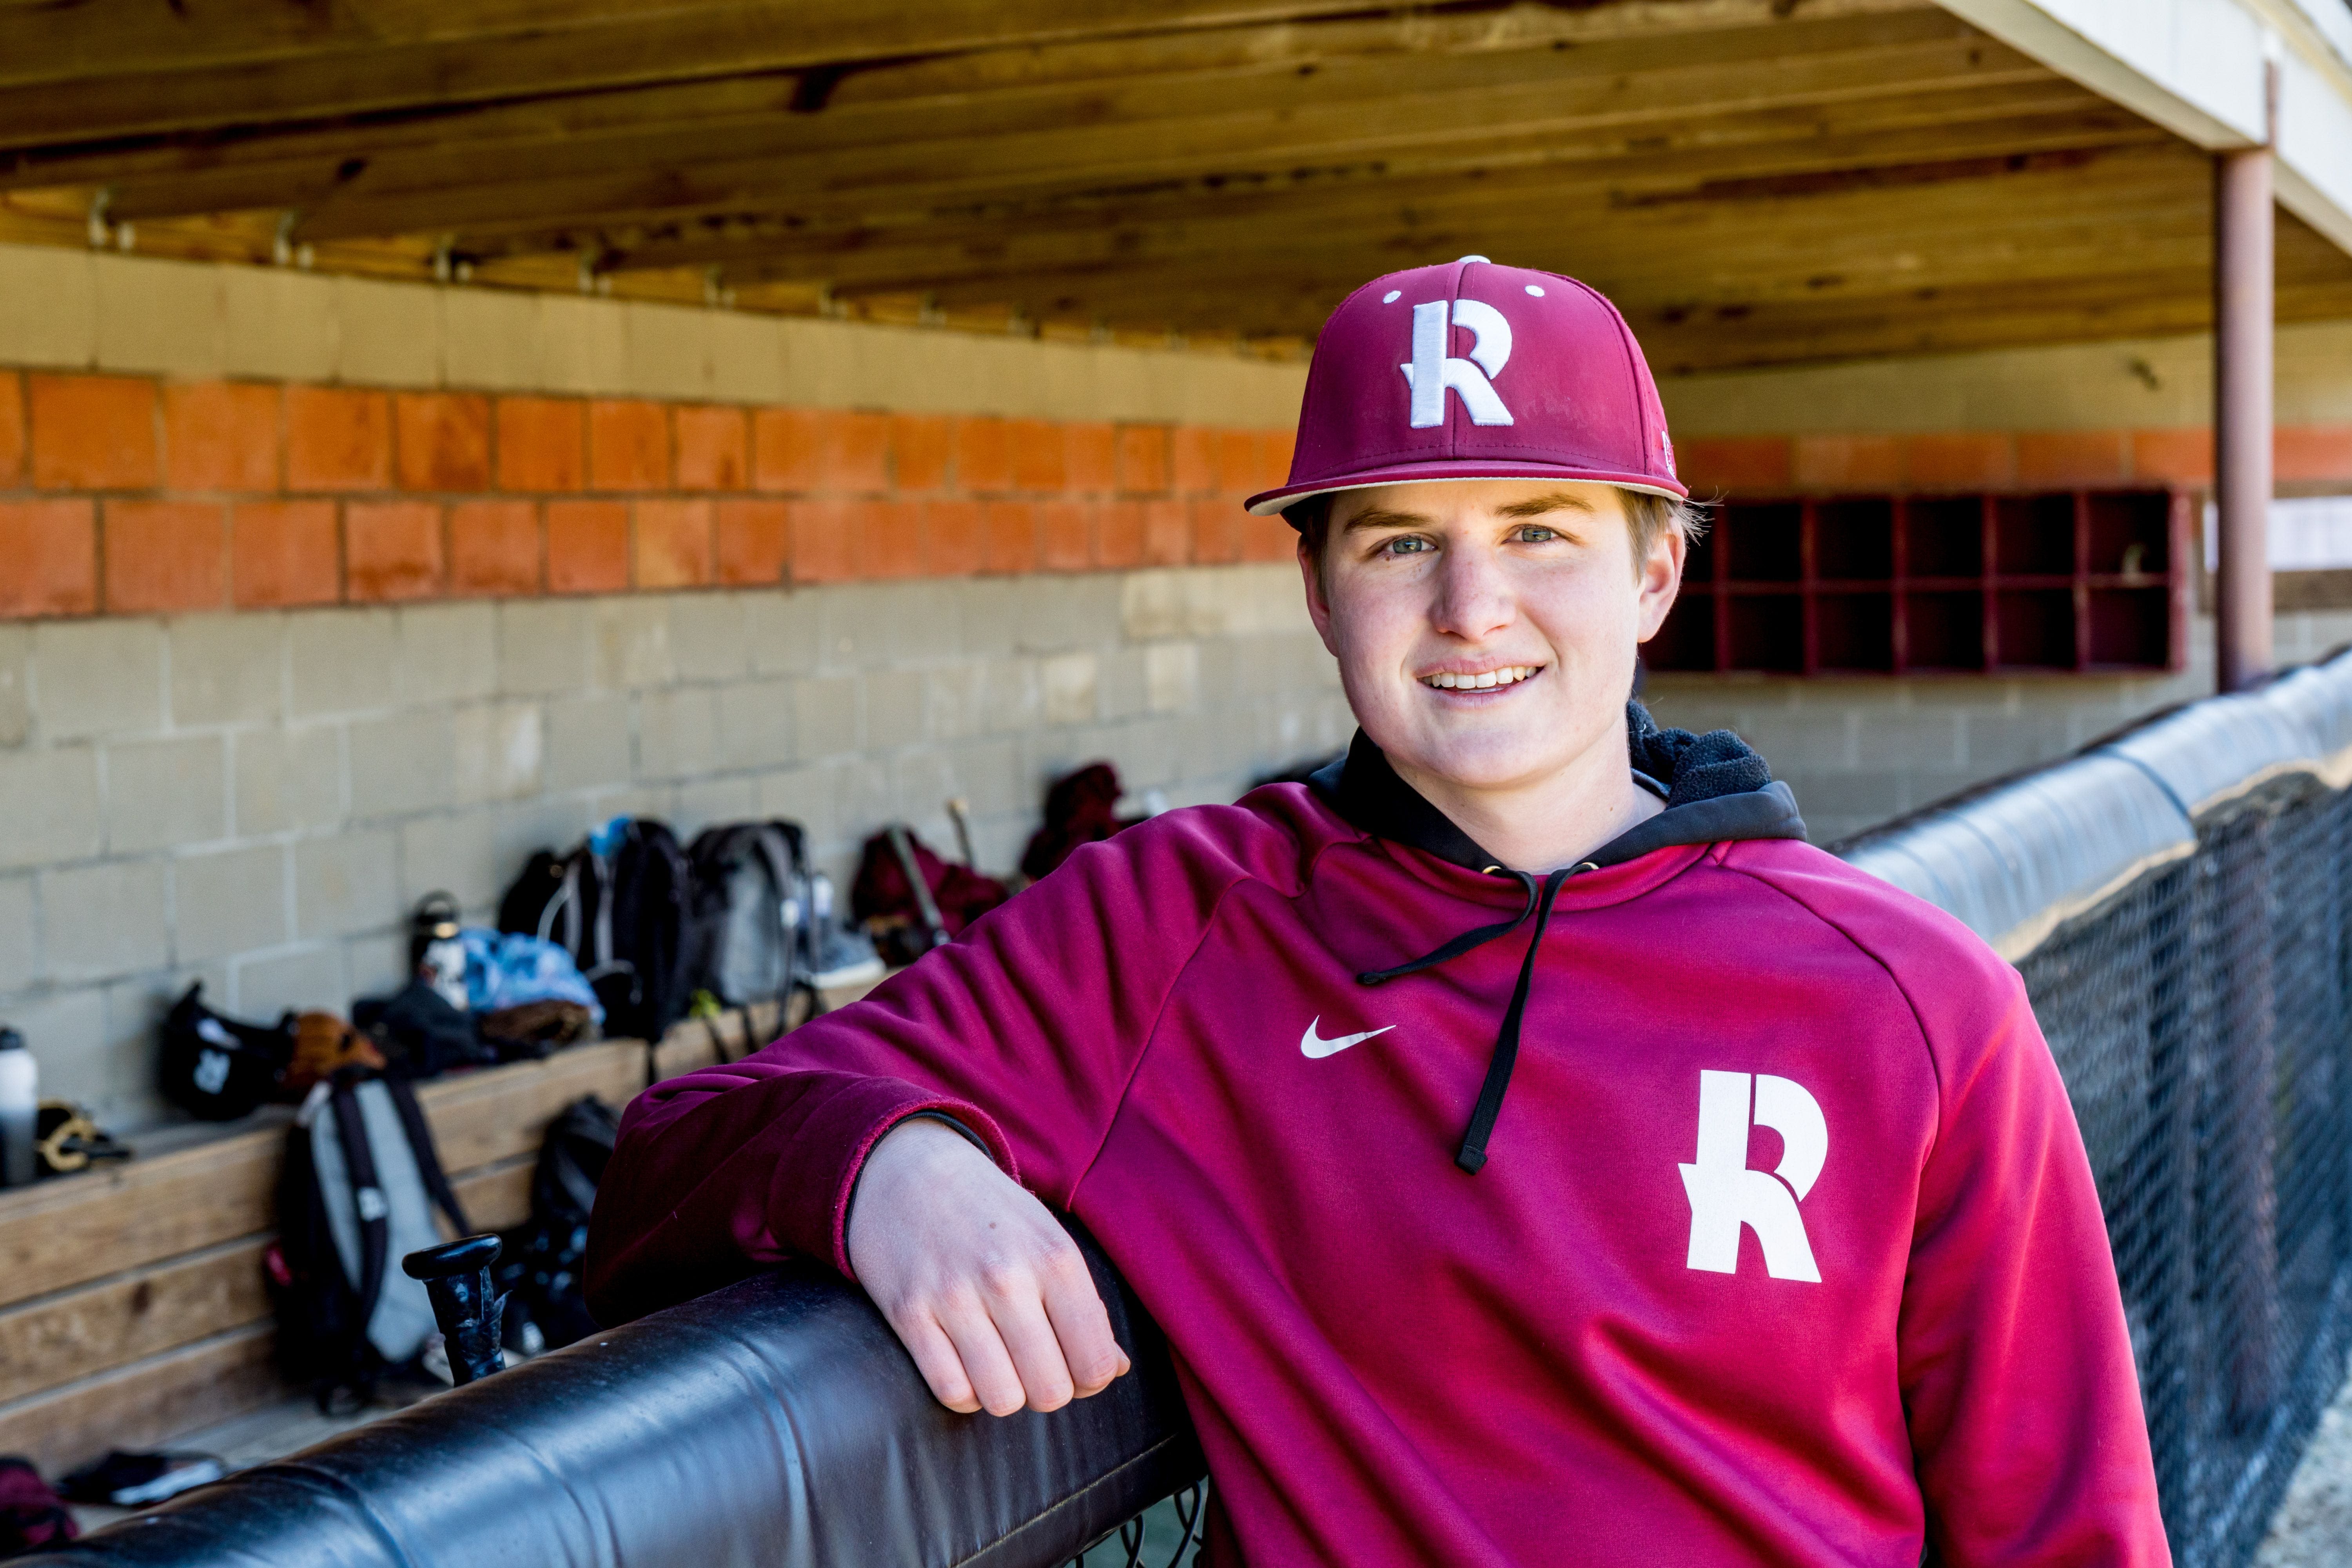 'Not playing for publicity. She earned the spot:' Rose-Hulman's first woman baseball player